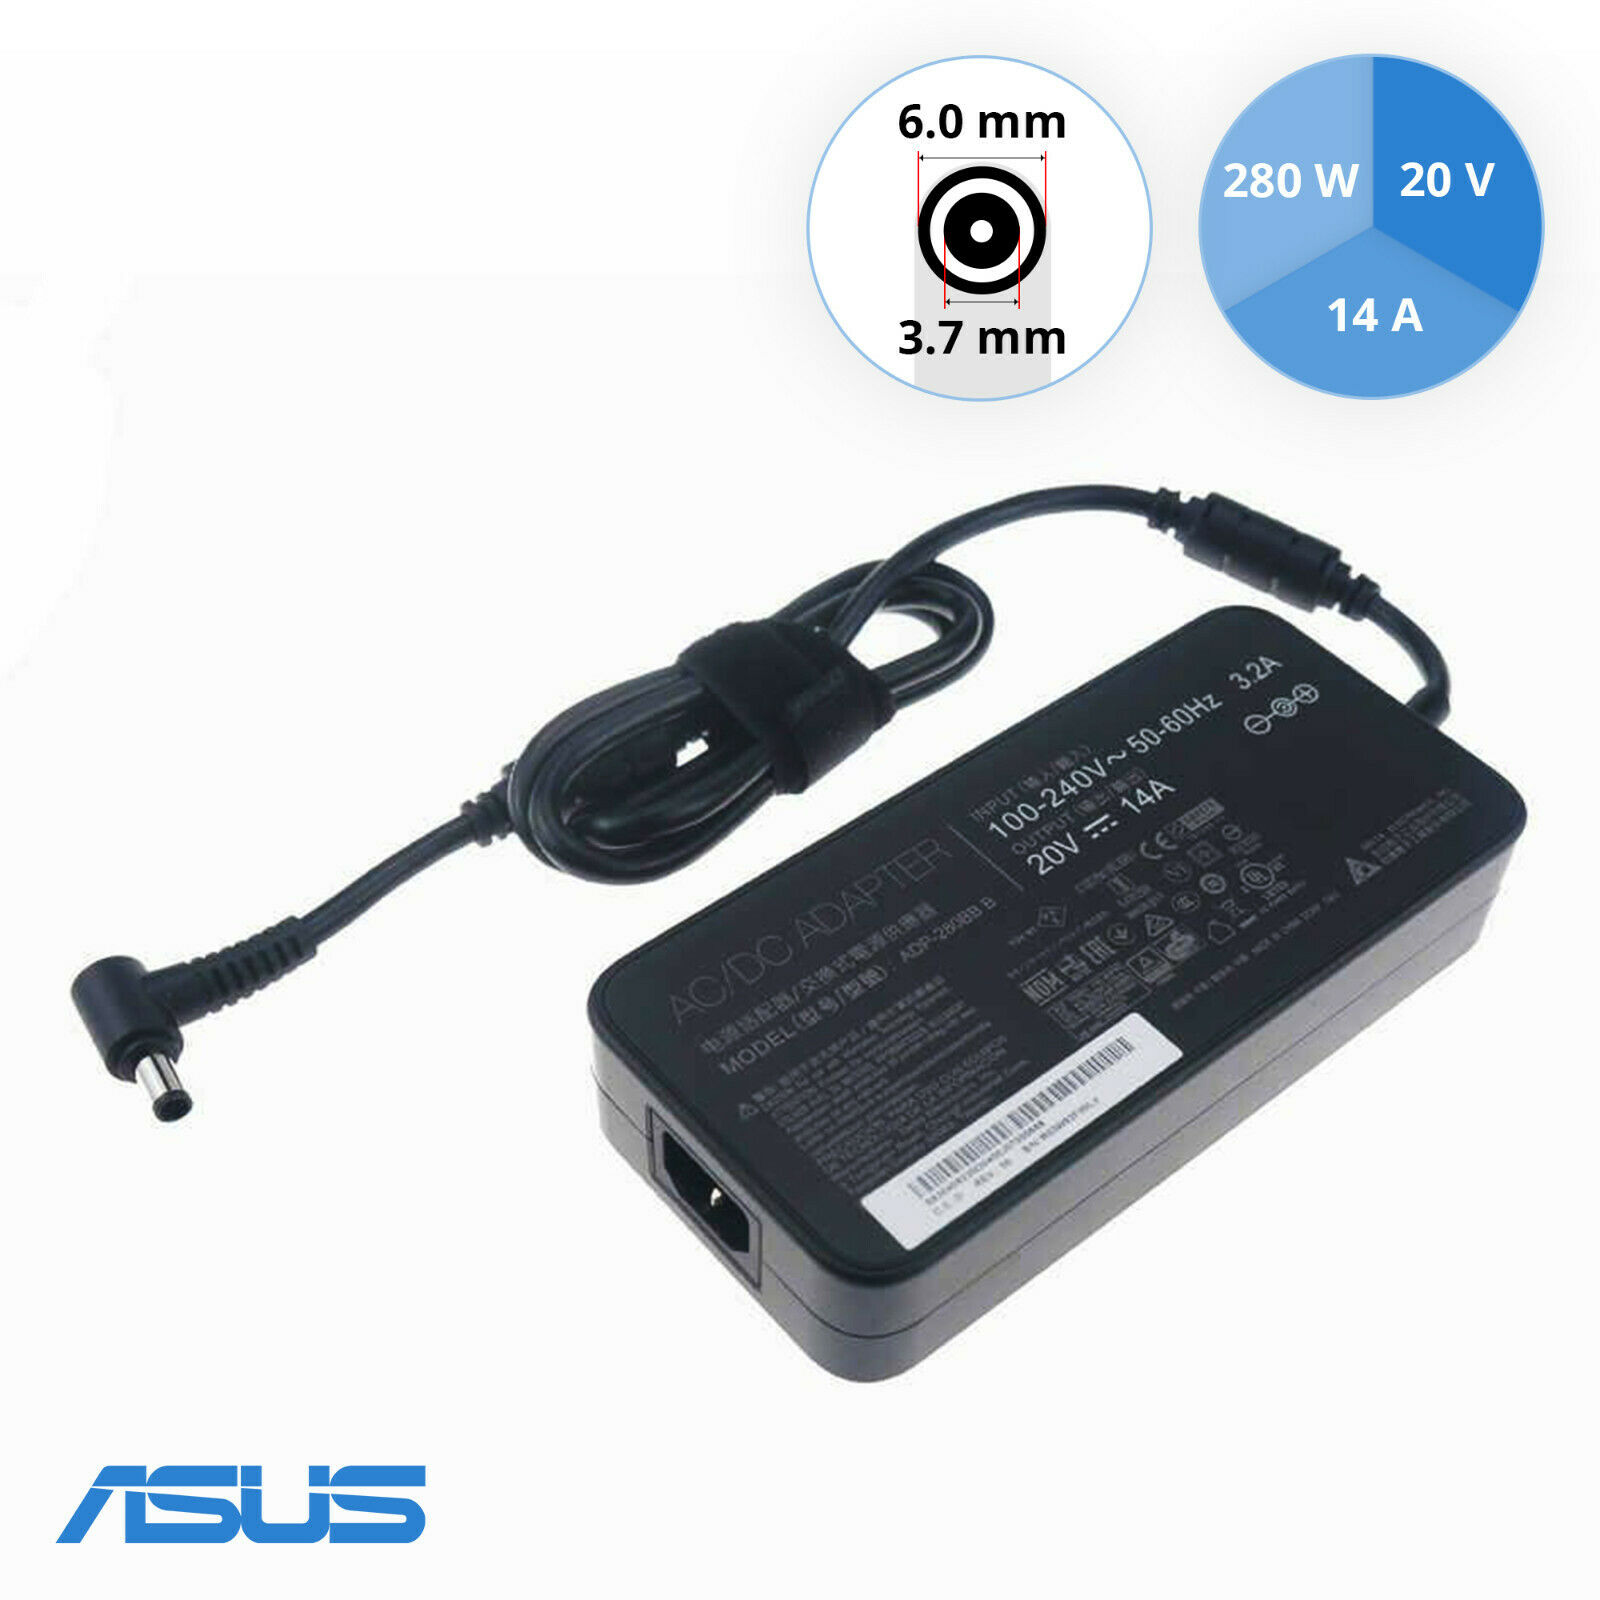 Original Asus ADP-280BB 20V 14A 280W AC Power Adapter ROG 6mmx3.7mm Compatible Brand: For ASUS Type: Power Adapter M